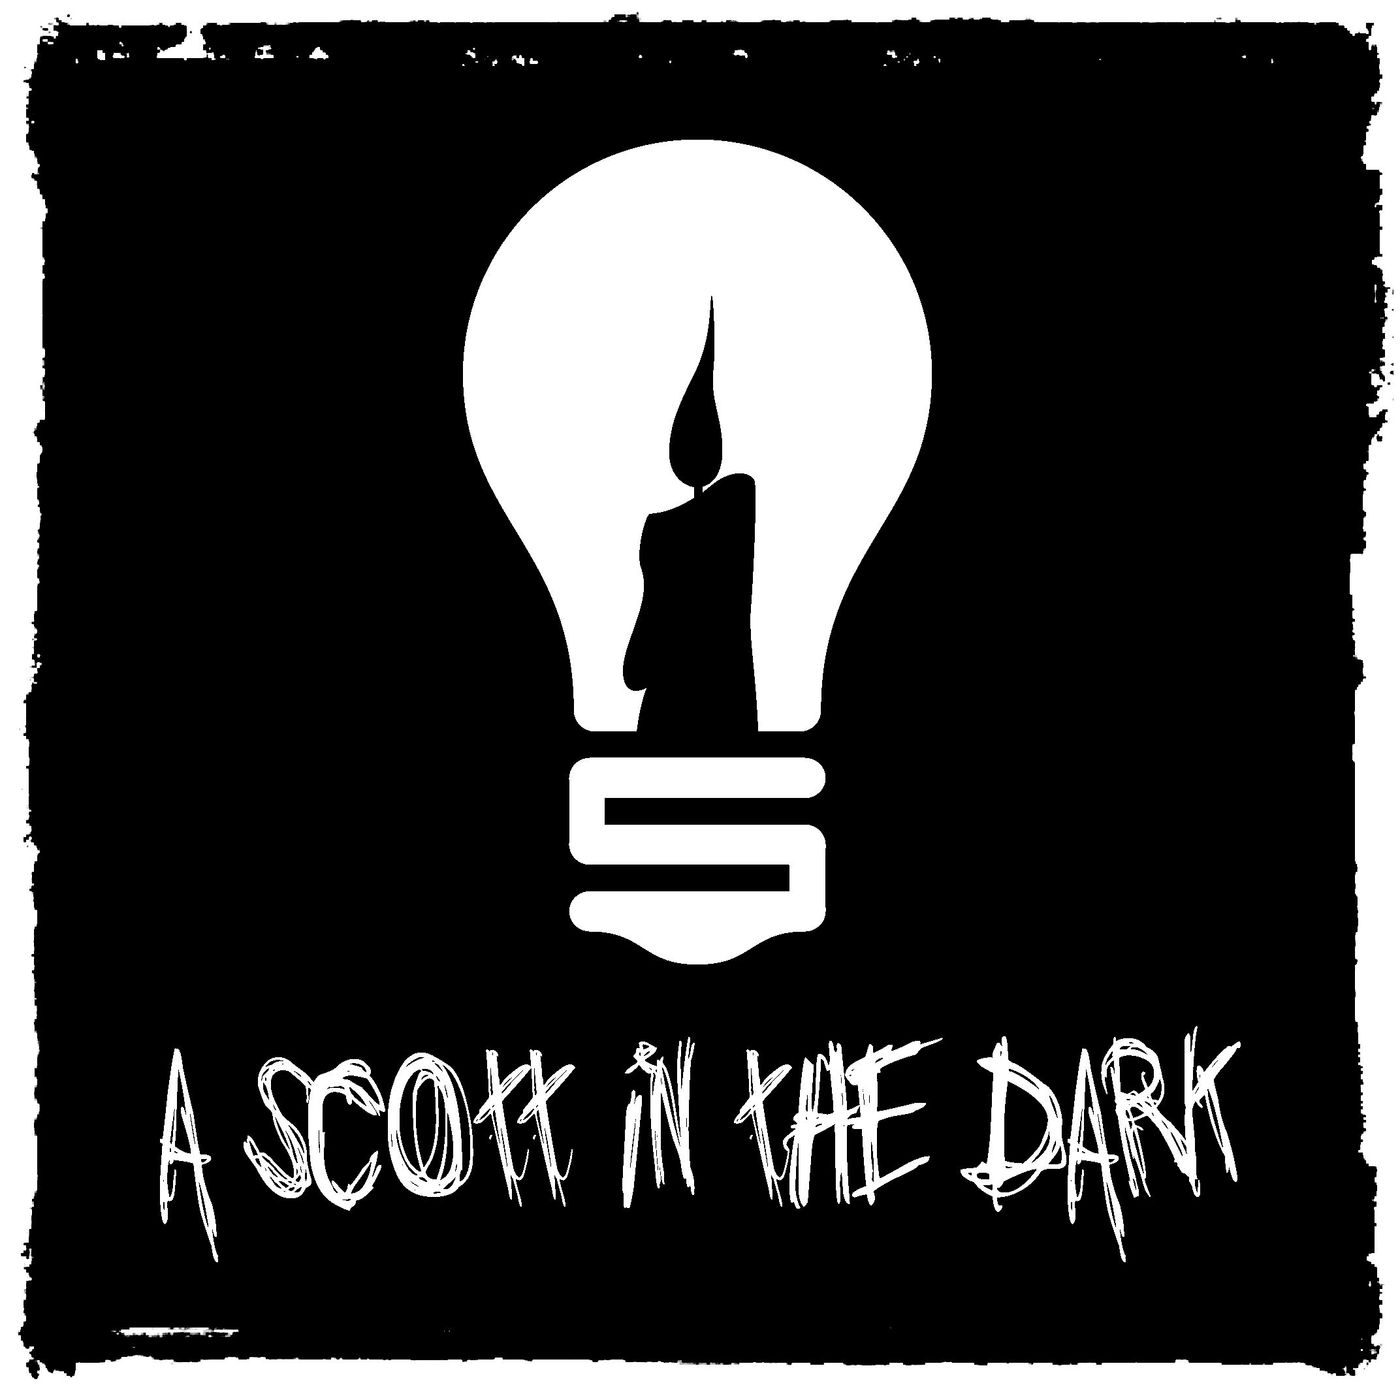 [A Scott in the Dark] Episode 18: The Director is The Lens not The Sun